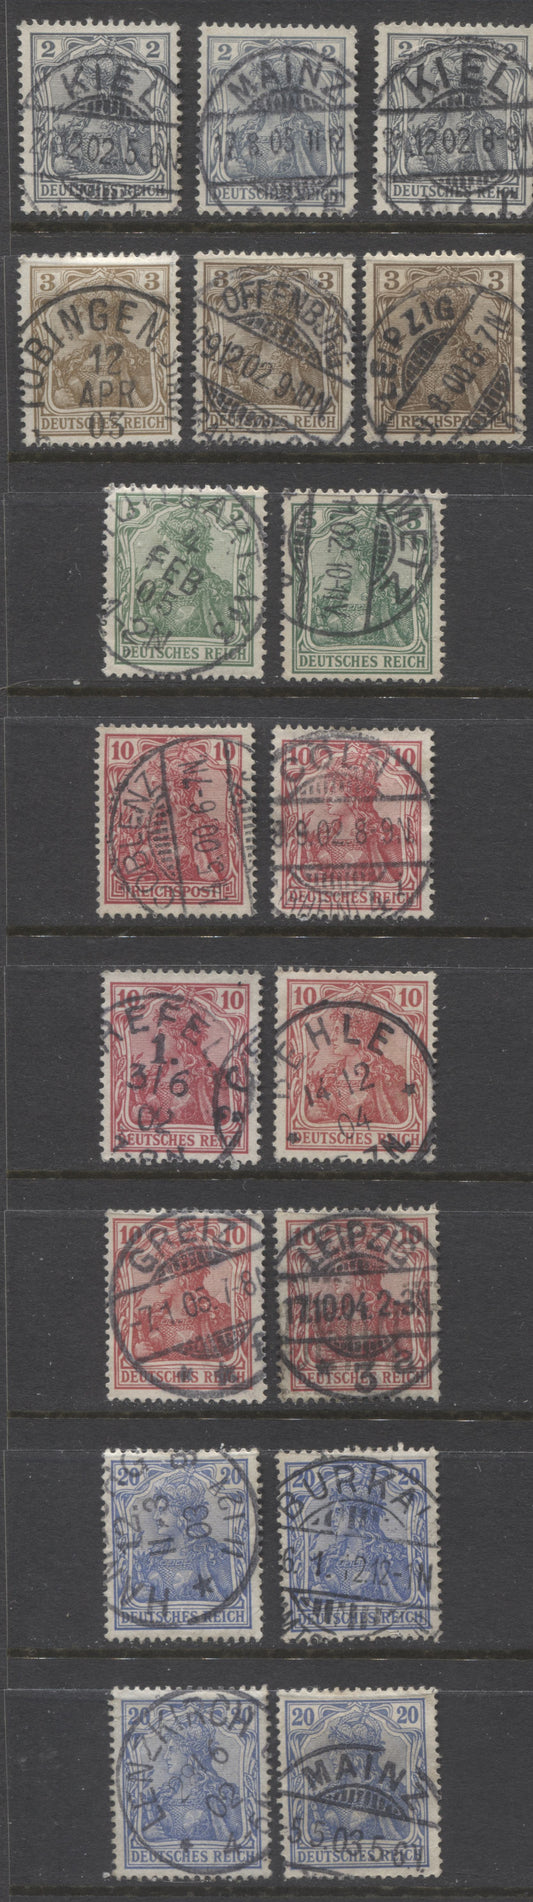 Lot 433 Germany SC#65C-69 1902 Unwatermarked Germania Issue, All With SON Town Cancels, Different Shades, 18 Fine & VF Used Singles, Click on Listing to See ALL Pictures, Estimated Value $20